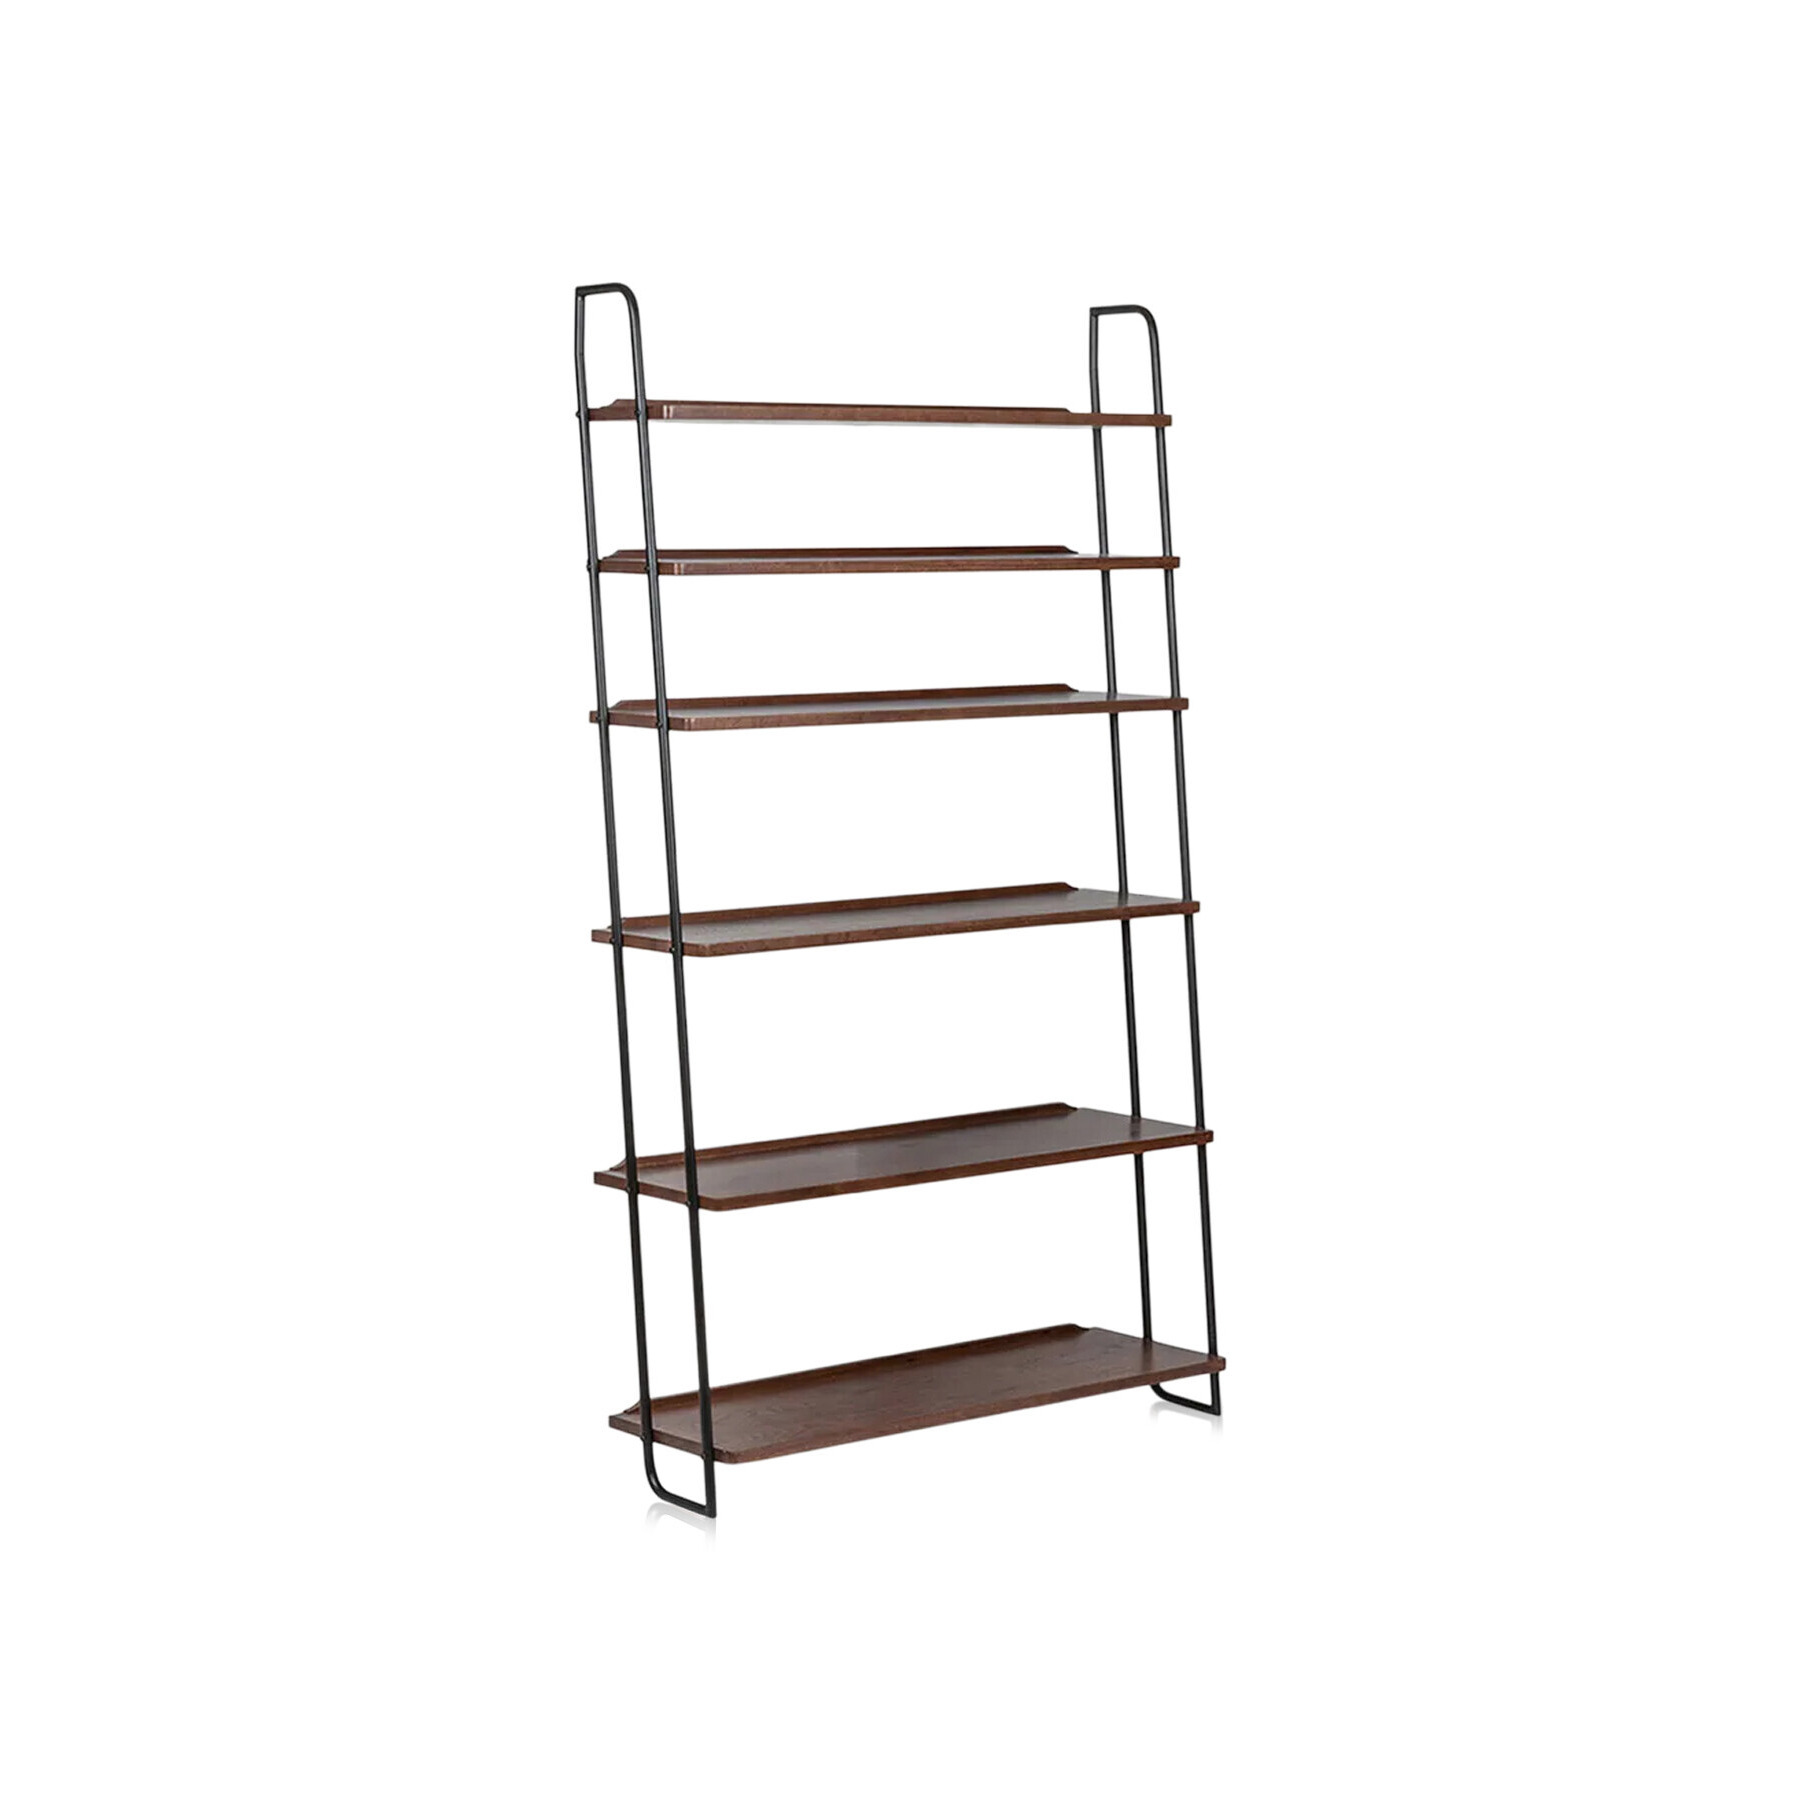 Heal's Brunel Lean To Wide Shelves Dark Wood - Size 100x35x175 Brown - image 1